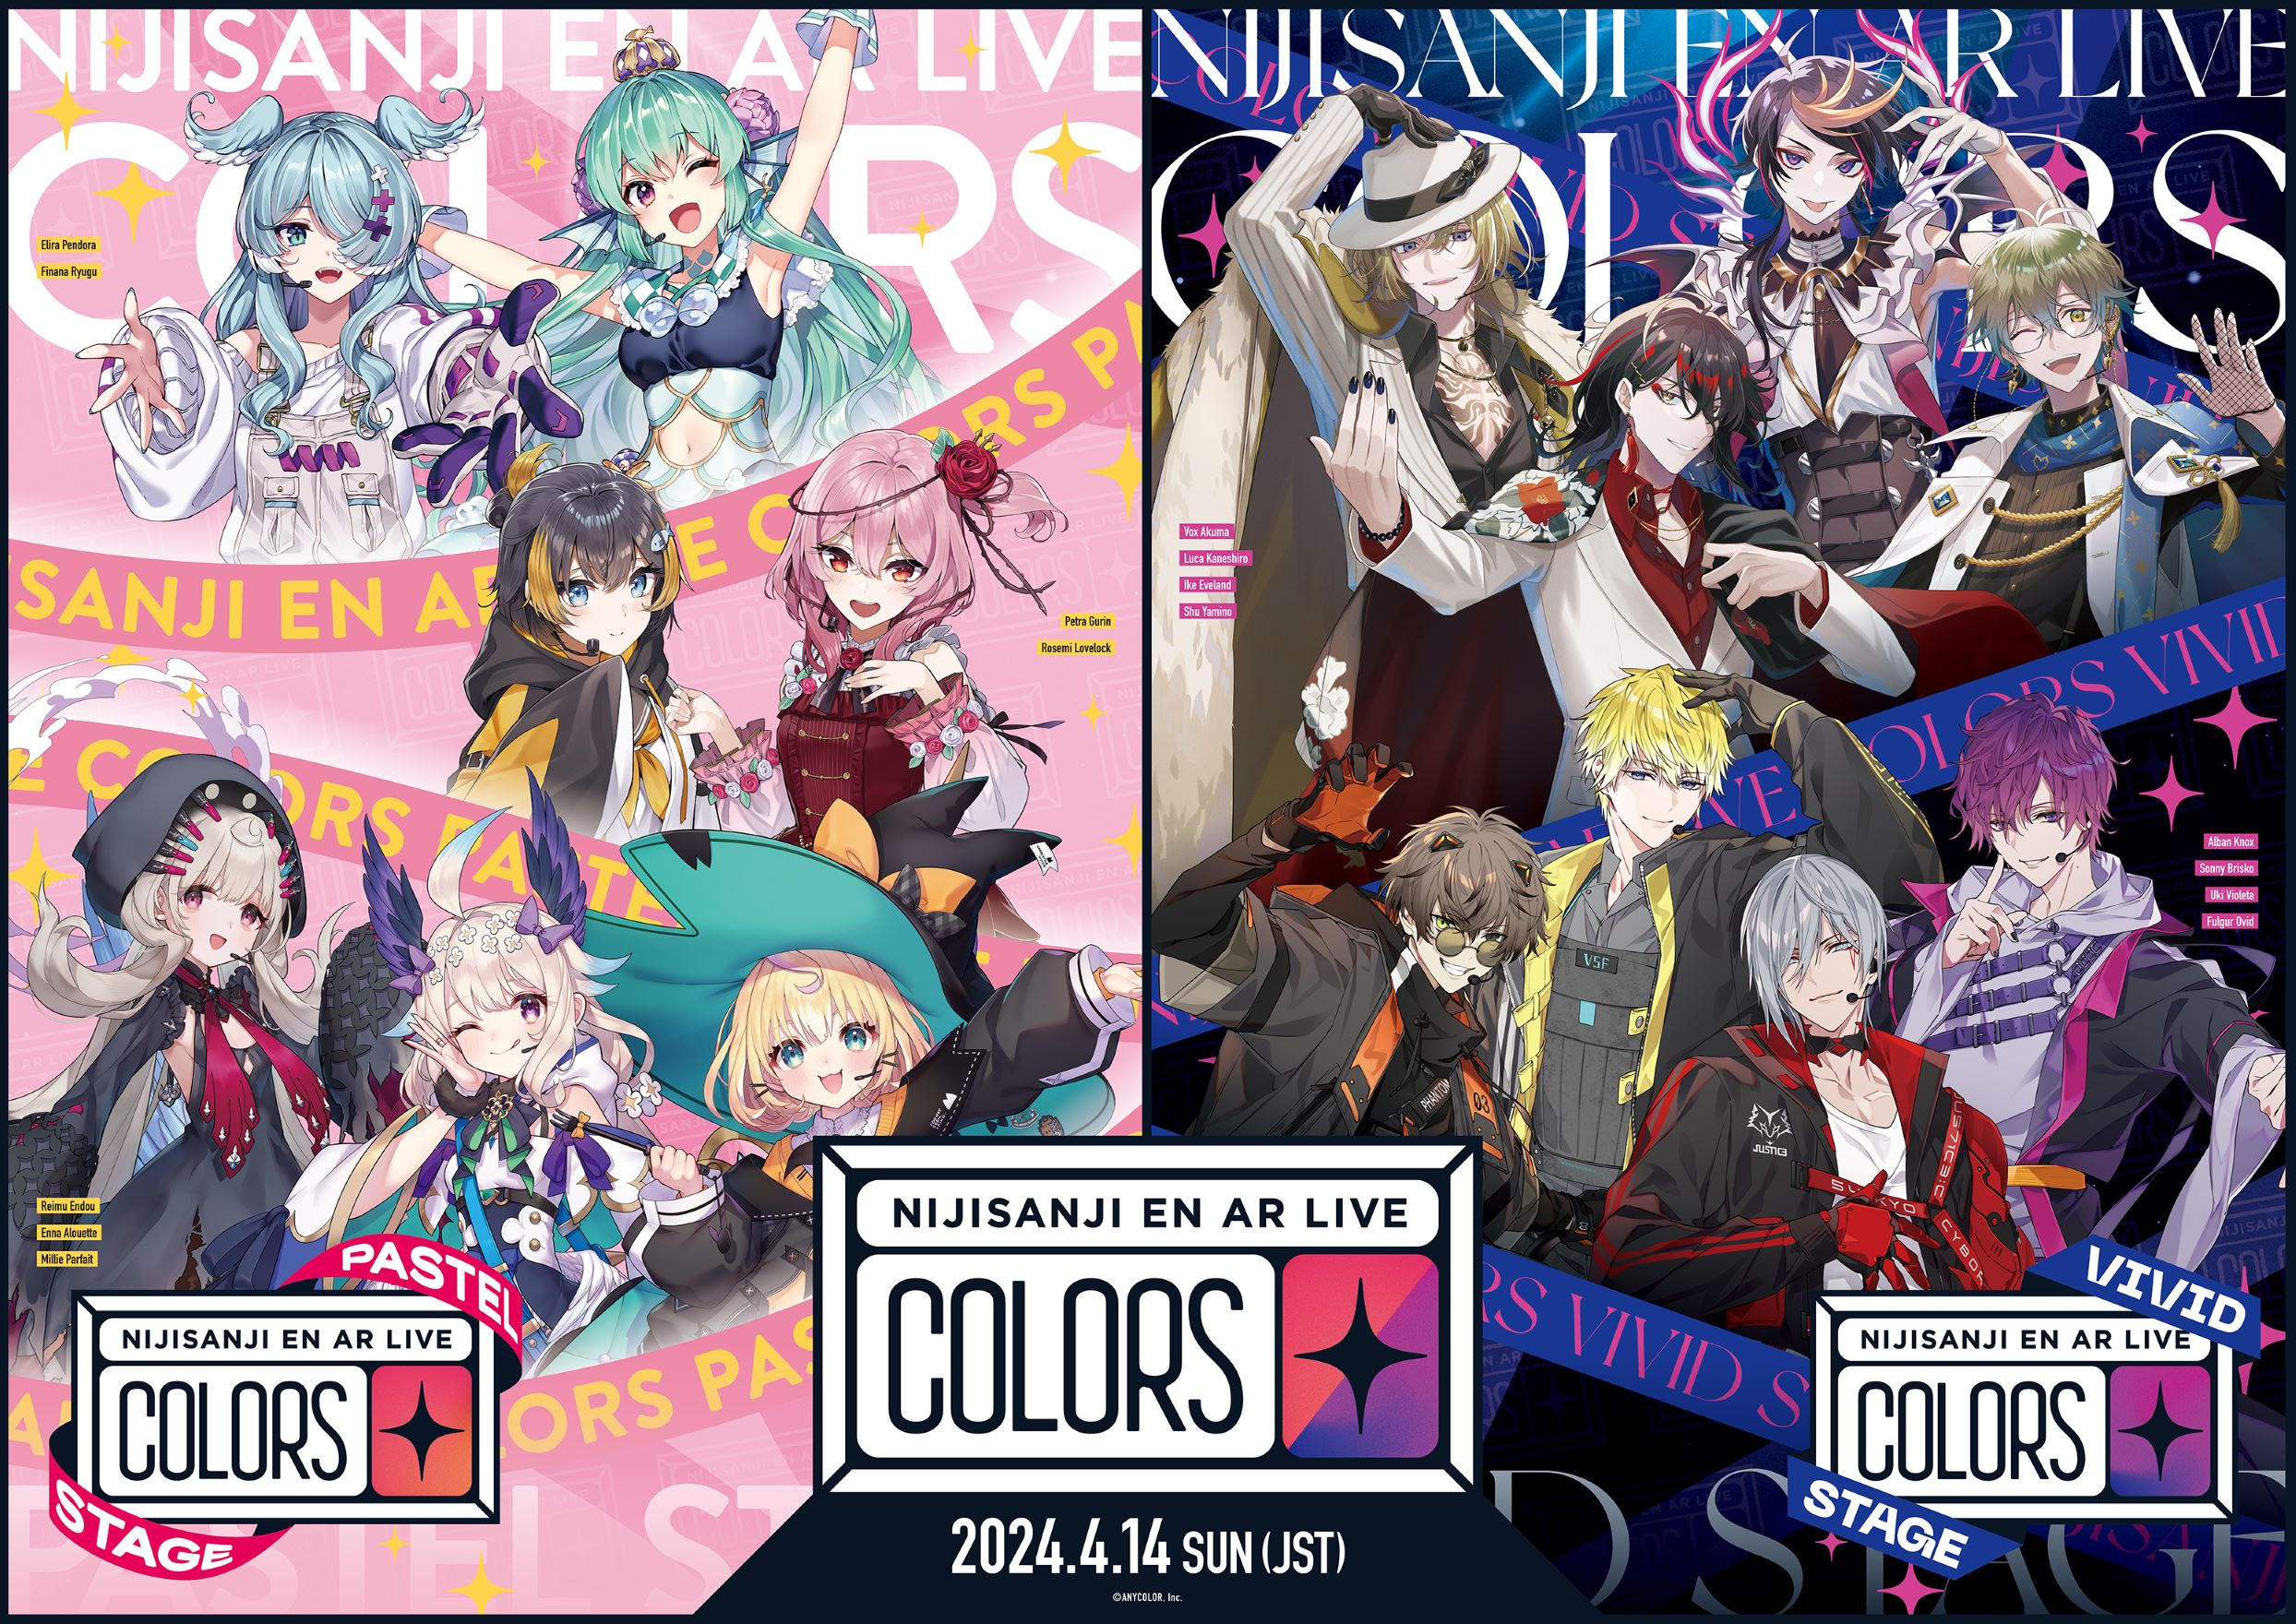 Sony’s Stagecrowd To Livestream NIJISANJI EN AR LIVE “COLORS” Event